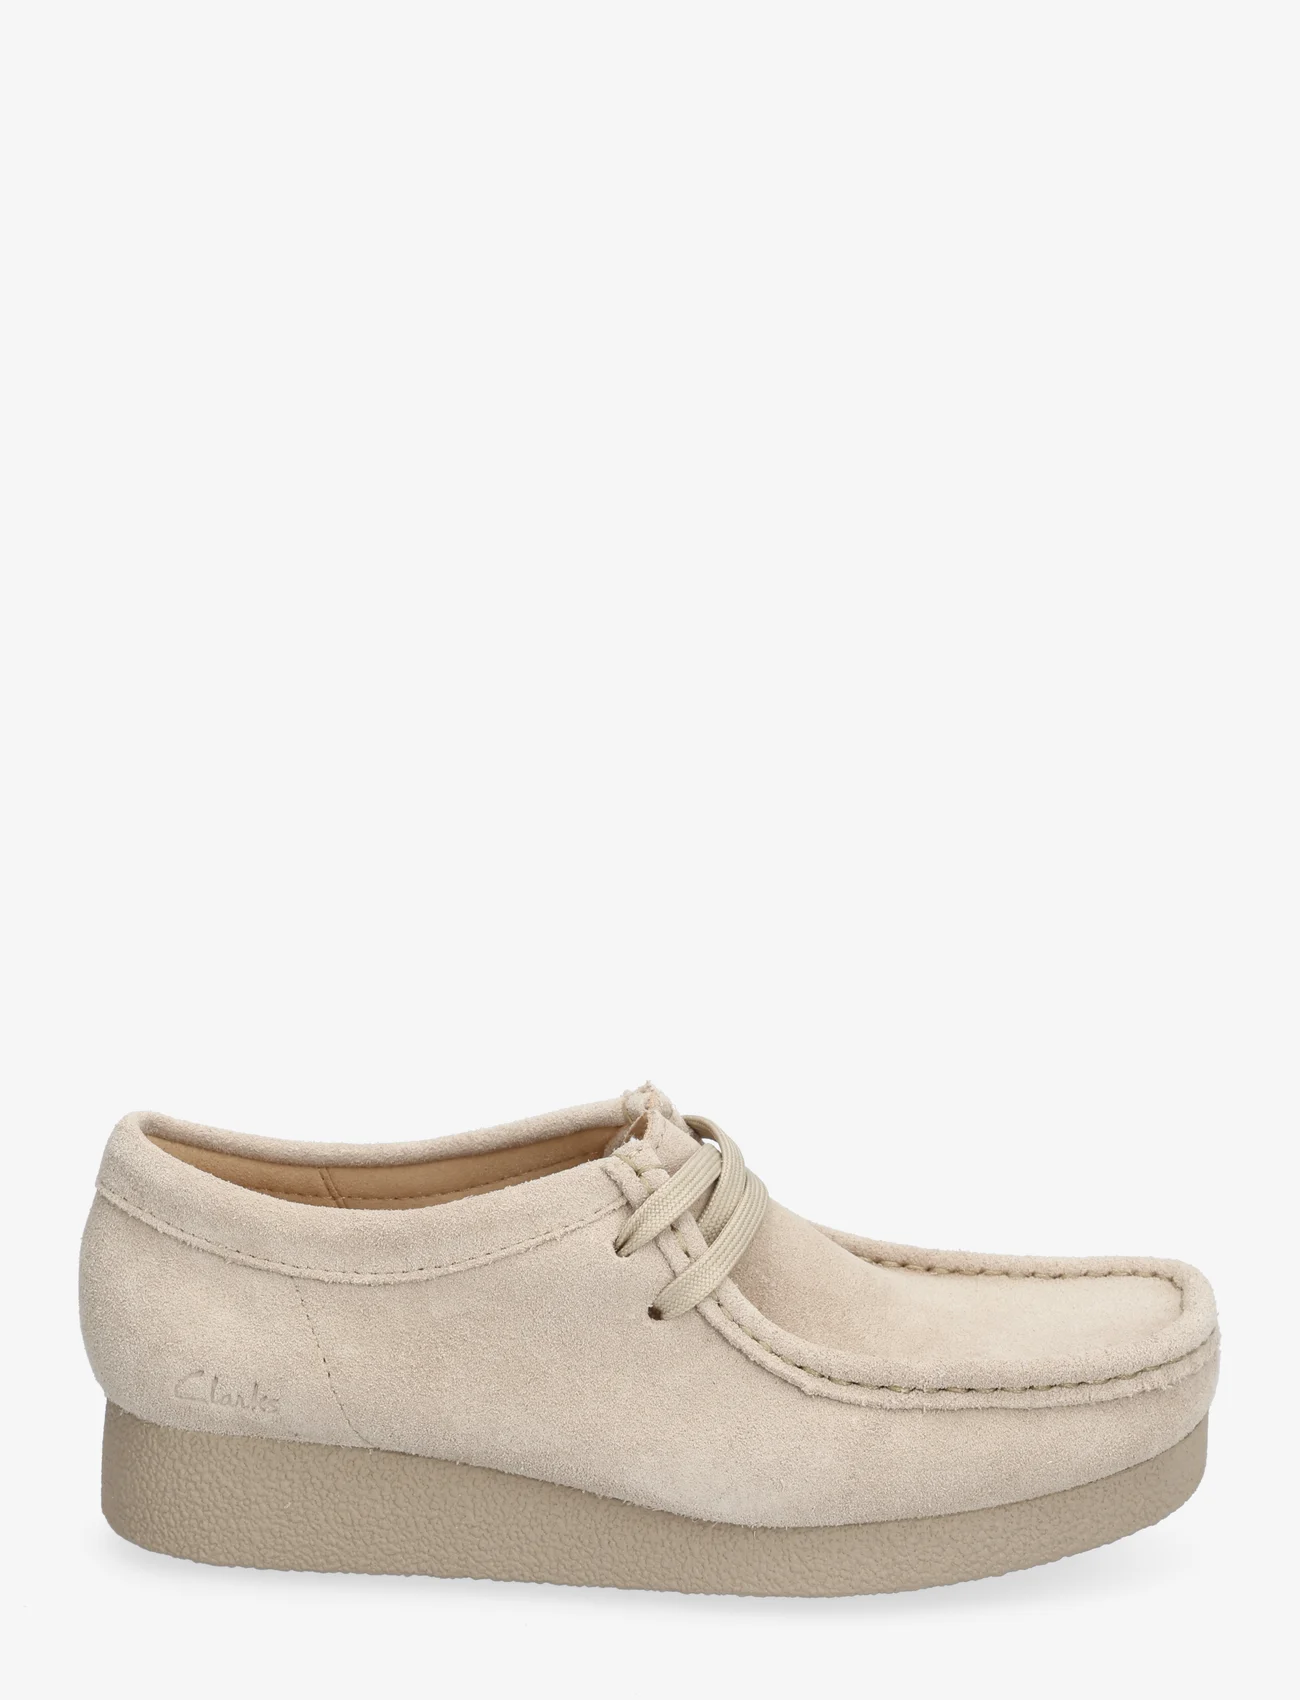 Clarks - WallabeeEVOSh D - spring shoes - 1247 sand suede - 1